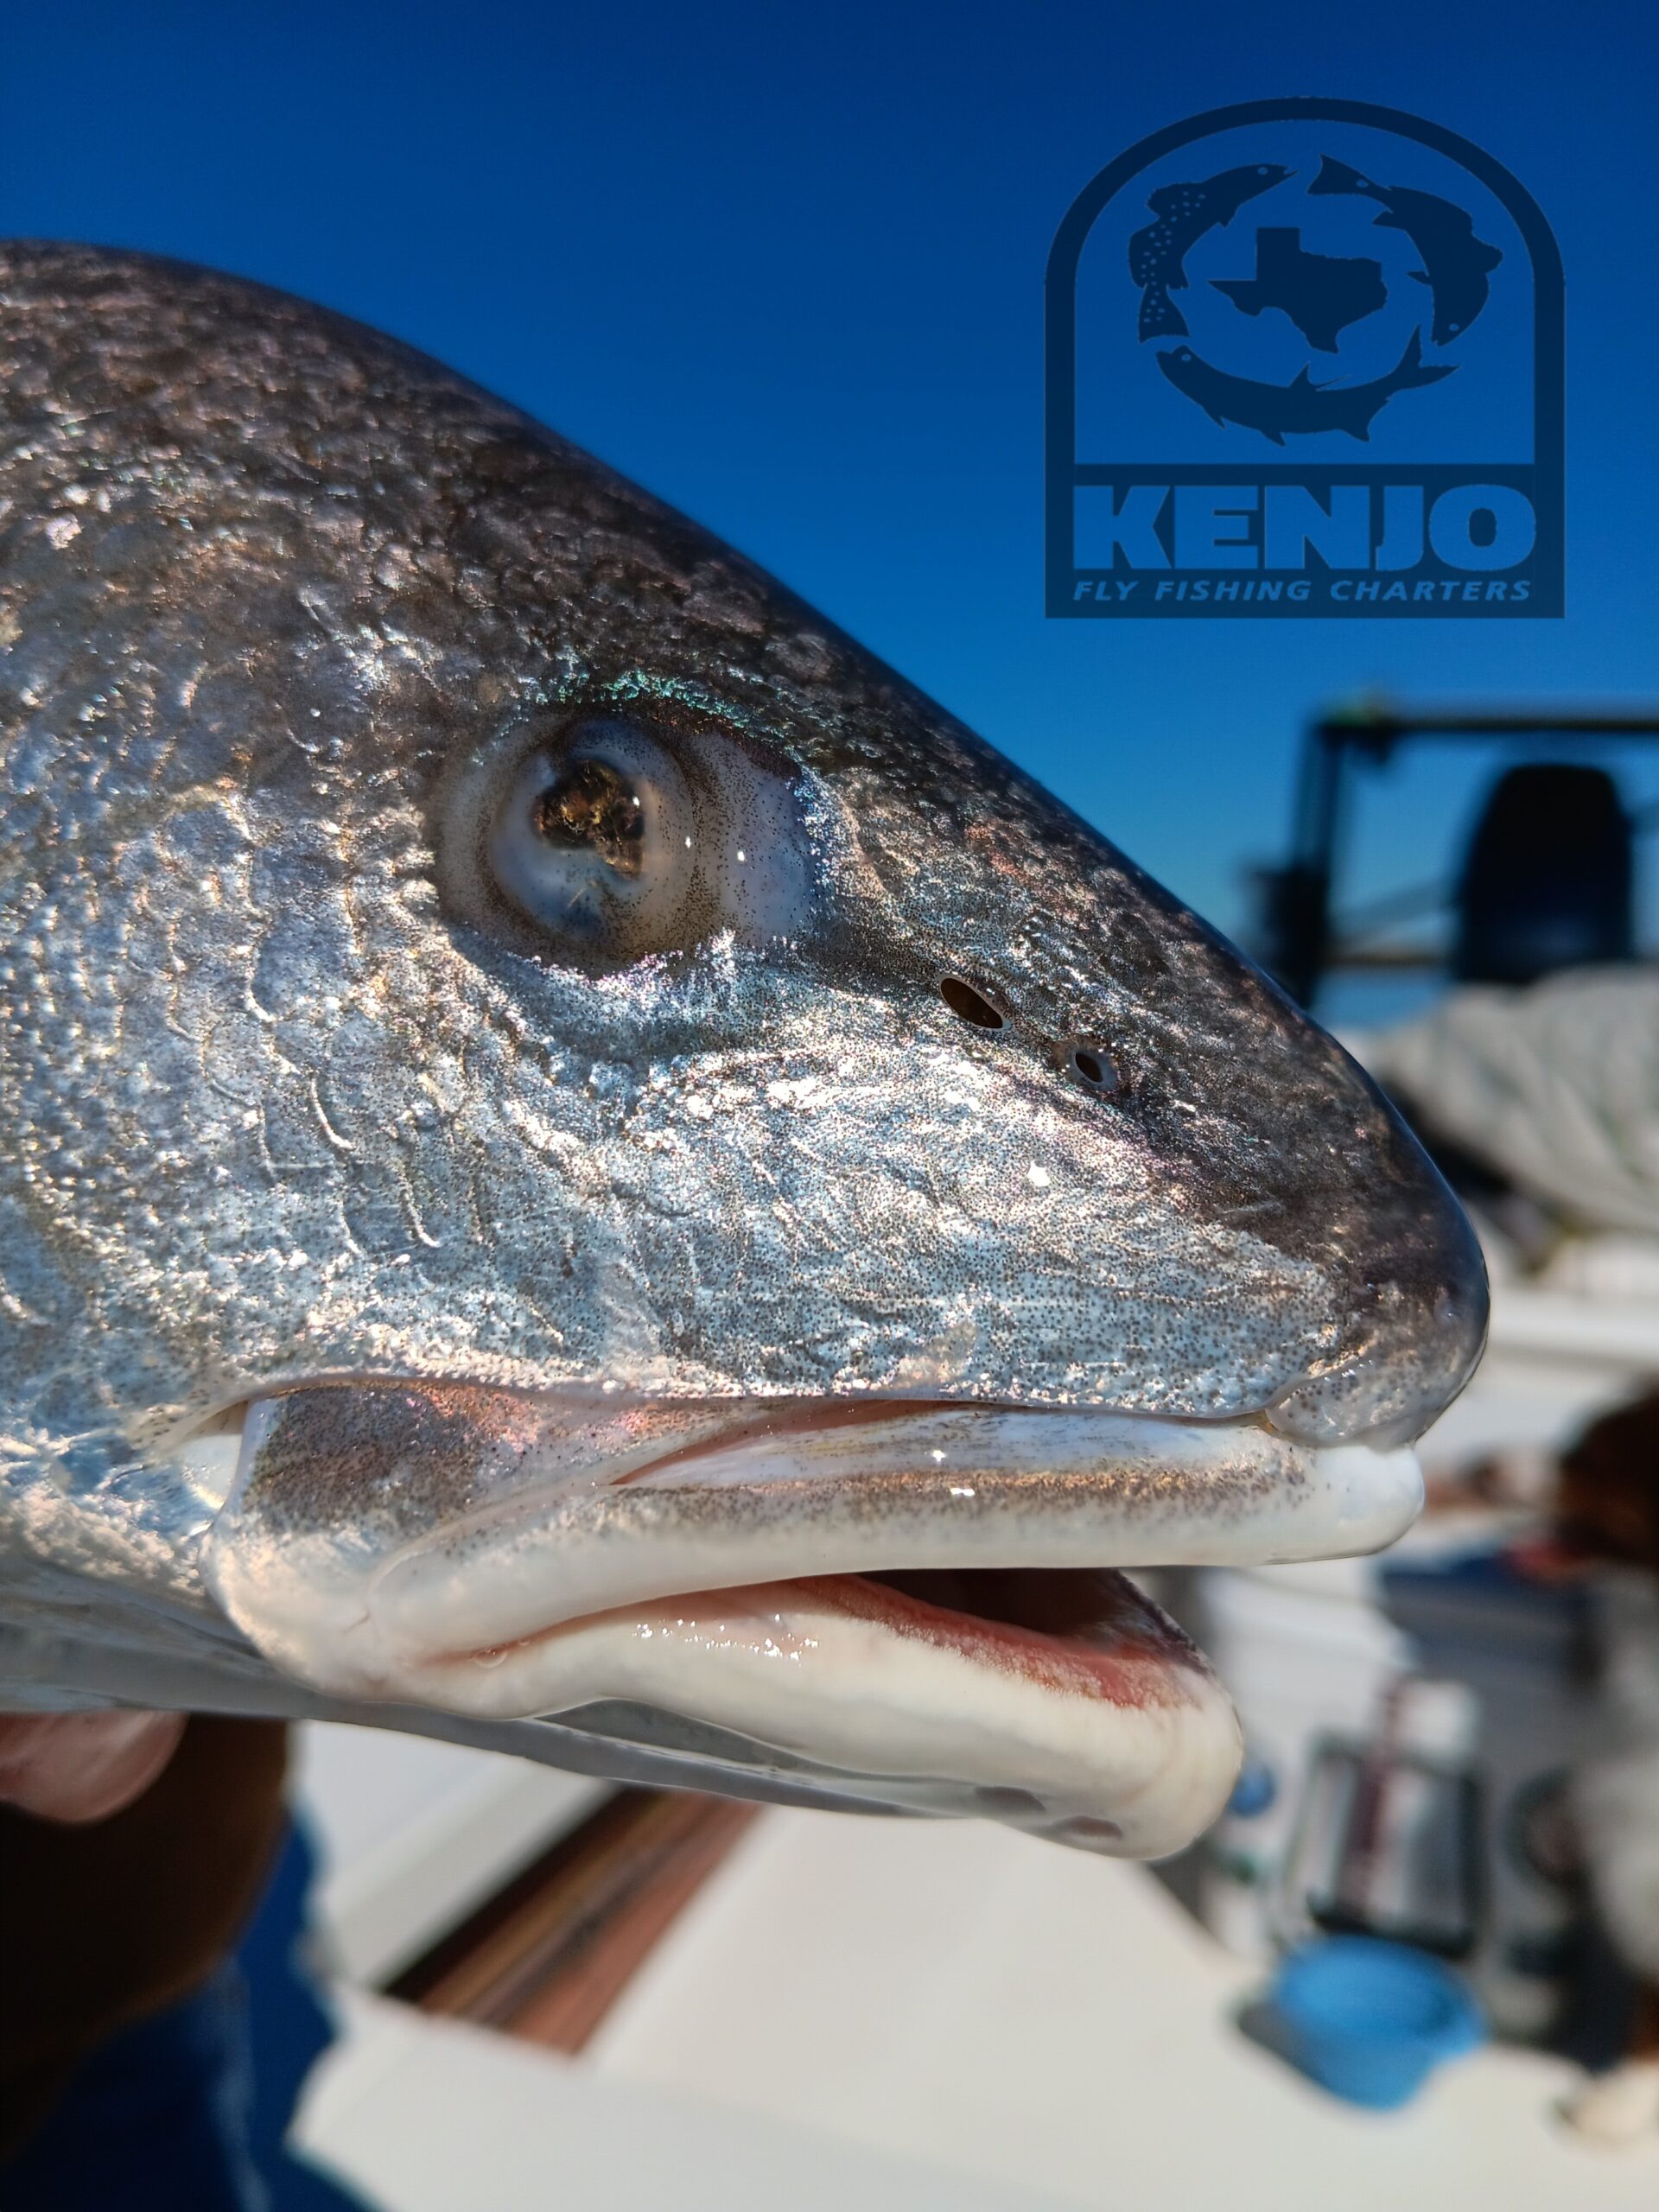 South Texas Fly Fishing Reports Archives - Kenjo Fly Fishing Charters